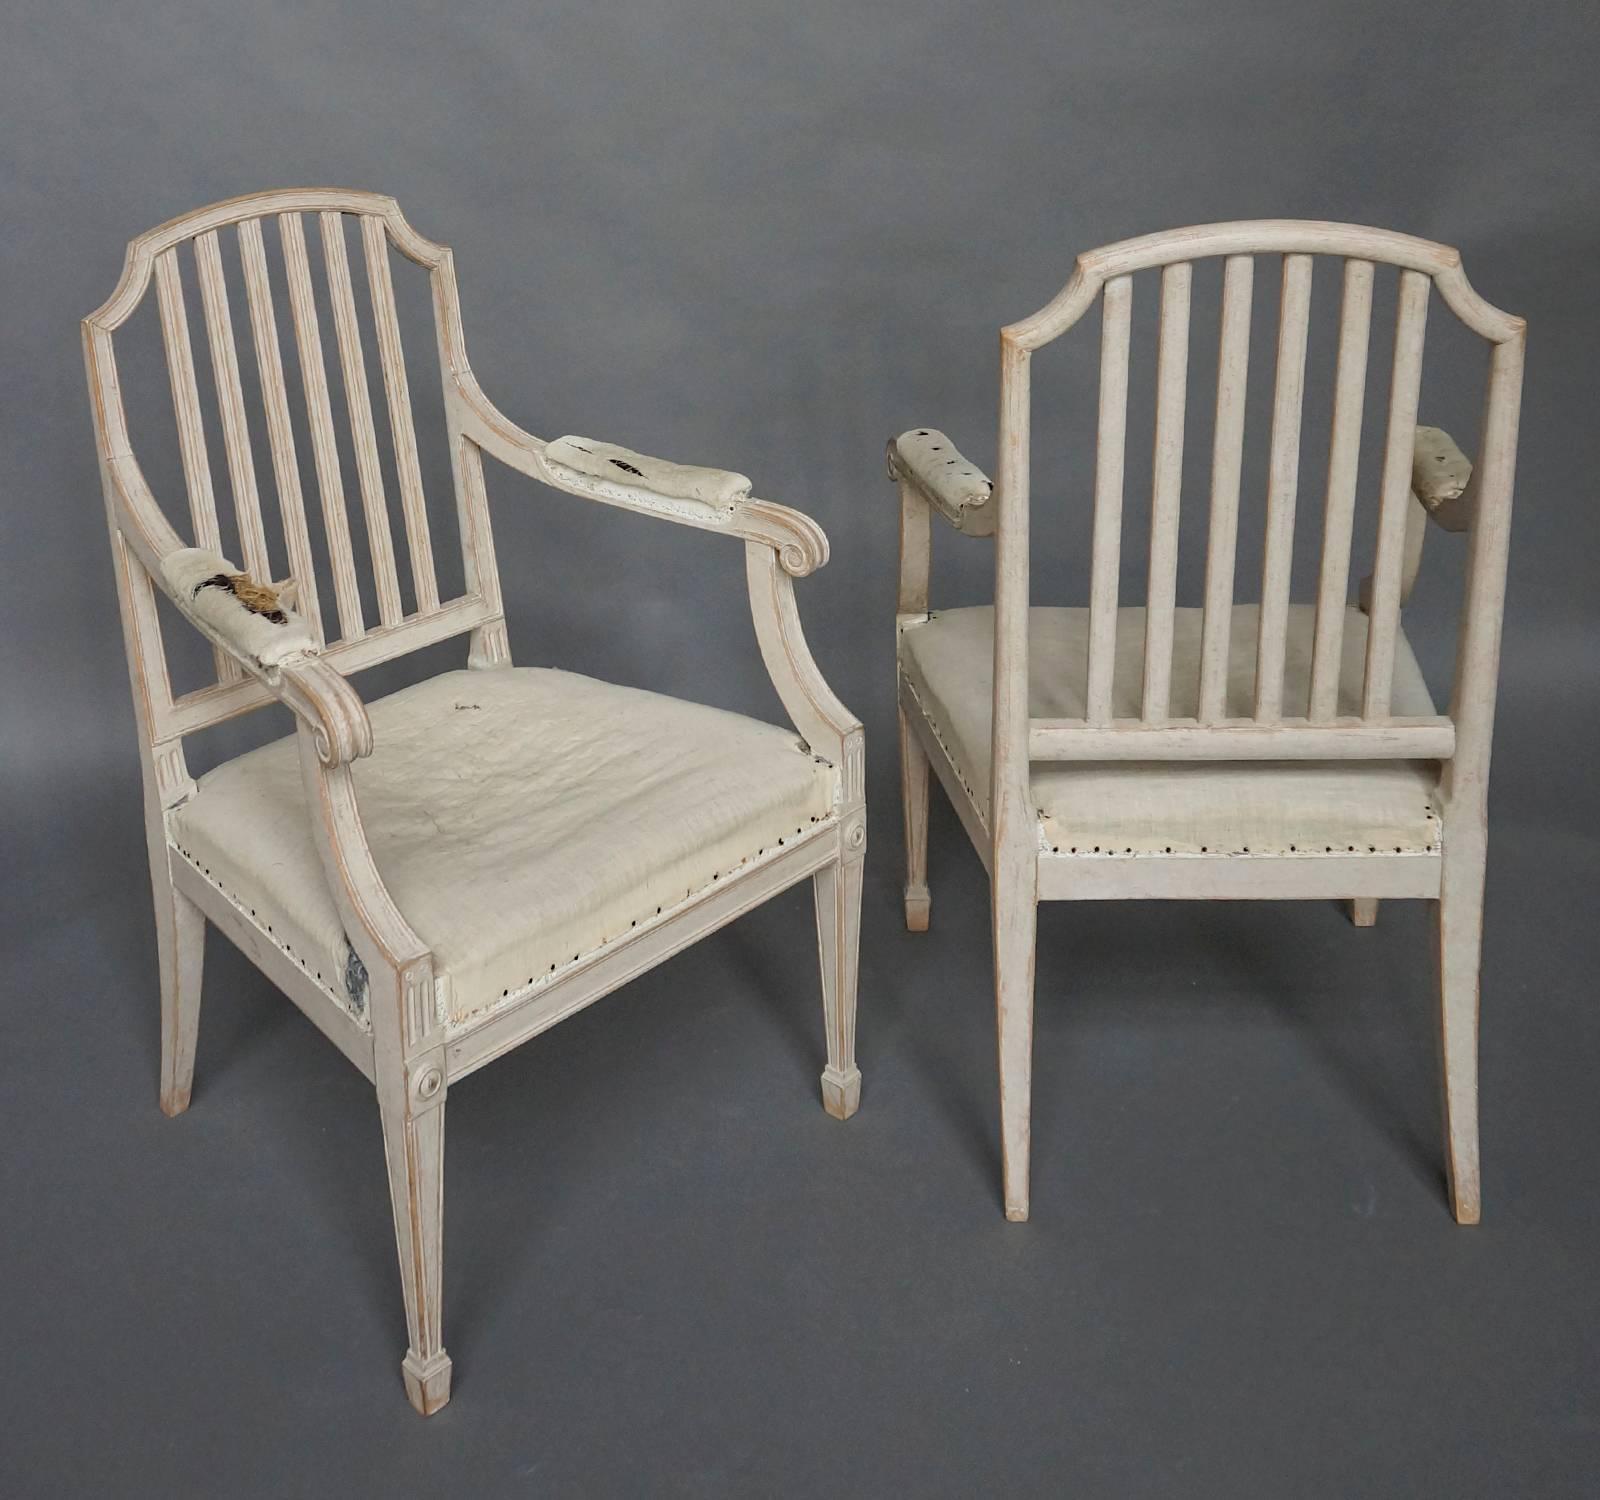 Pair of refined neoclassical style open armchairs, Sweden circa 1900. The arched baluster back extends smoothly into the padded arms which end in elegant scrolls. The front legs are square and tapering, and terminate in spade feet. Roomy,